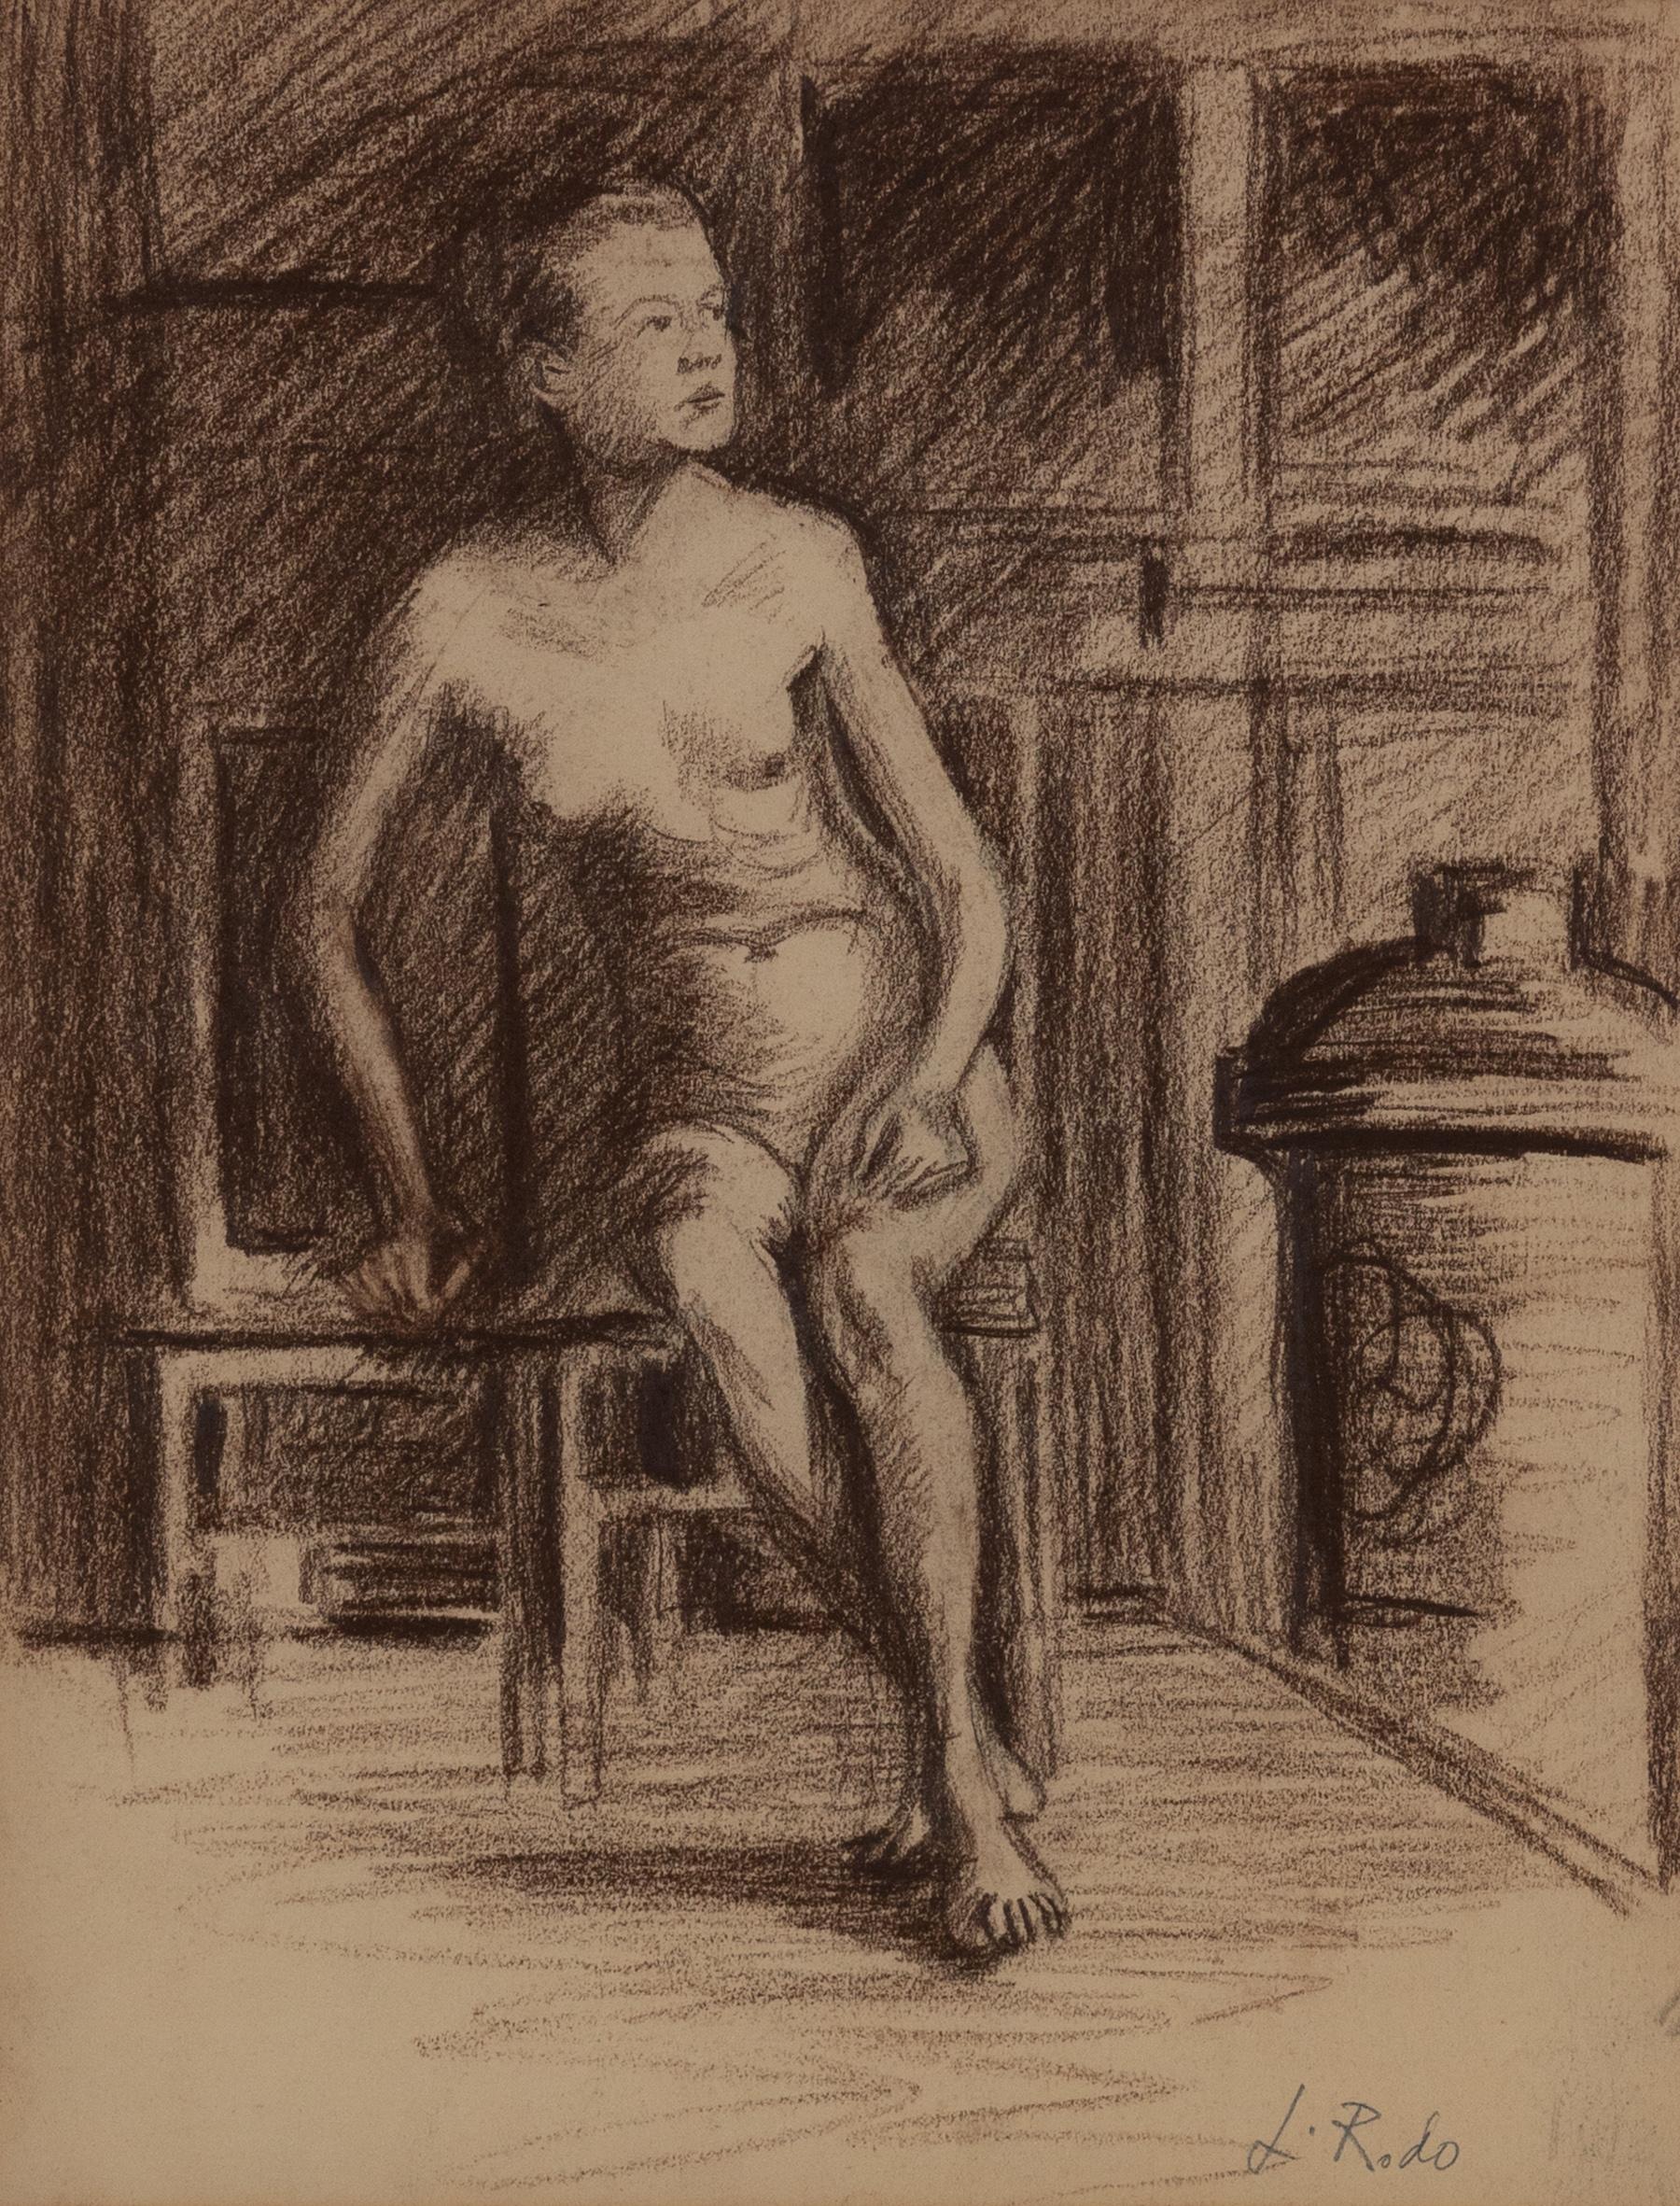 Nu Assise by Ludovic-Rodo Pissarro (1878-1952)
Charcoal on paper
31.3 x 24.2 cm (12 ⅜ x 9 ½ inches)
Signed lower right, L.Rodo

This work of art is accompanied by a certificate of authenticity signed and dated by Lélia Pissarro.

Artist